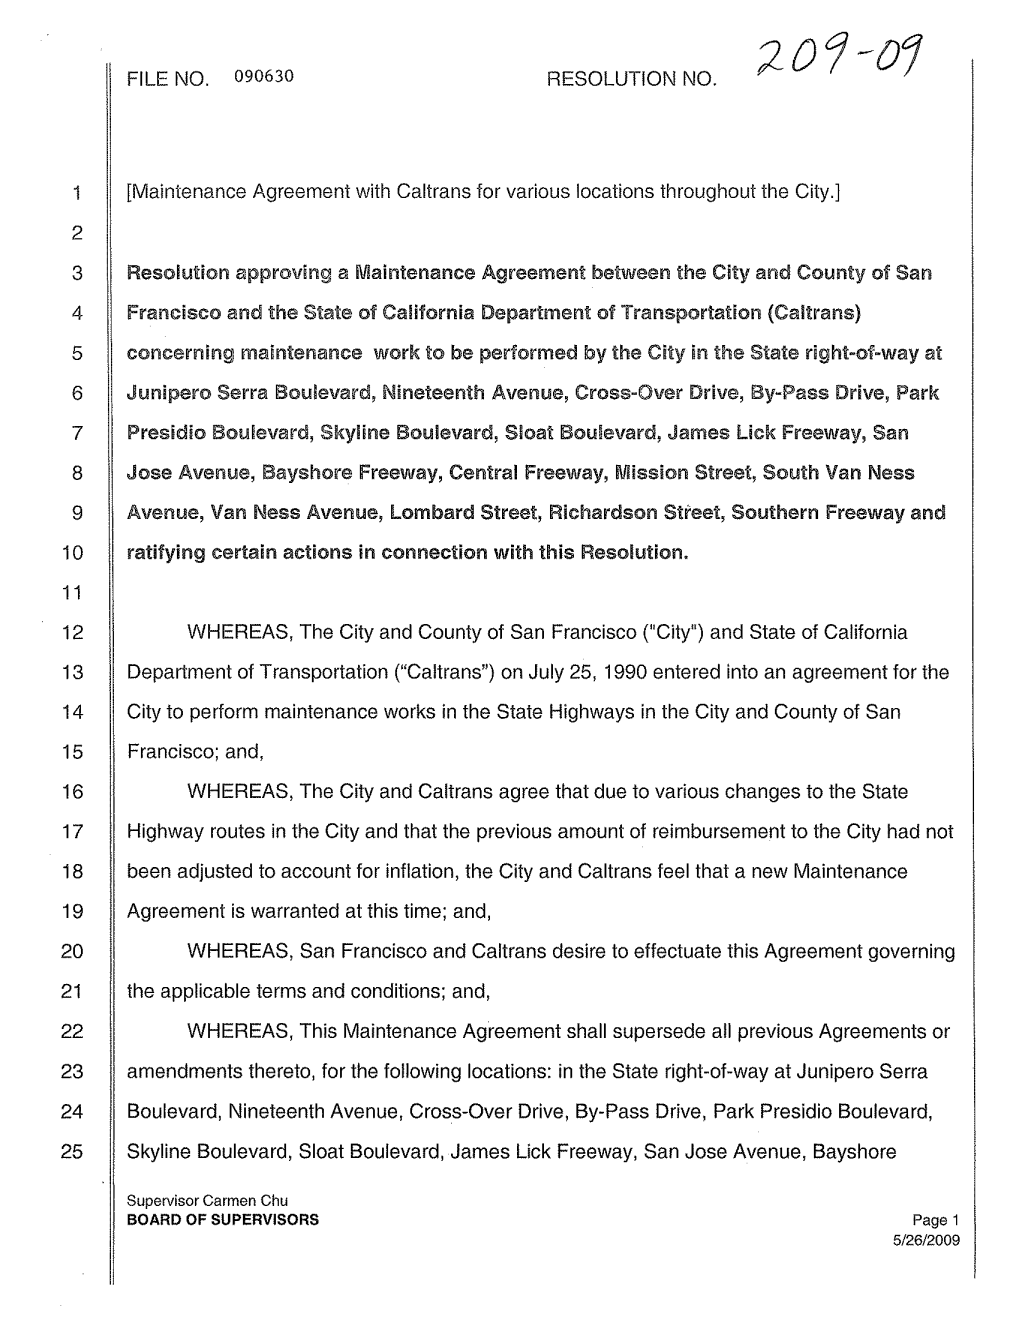 3 Resolution Approving a Maintenance Agreement Between the City and County of San